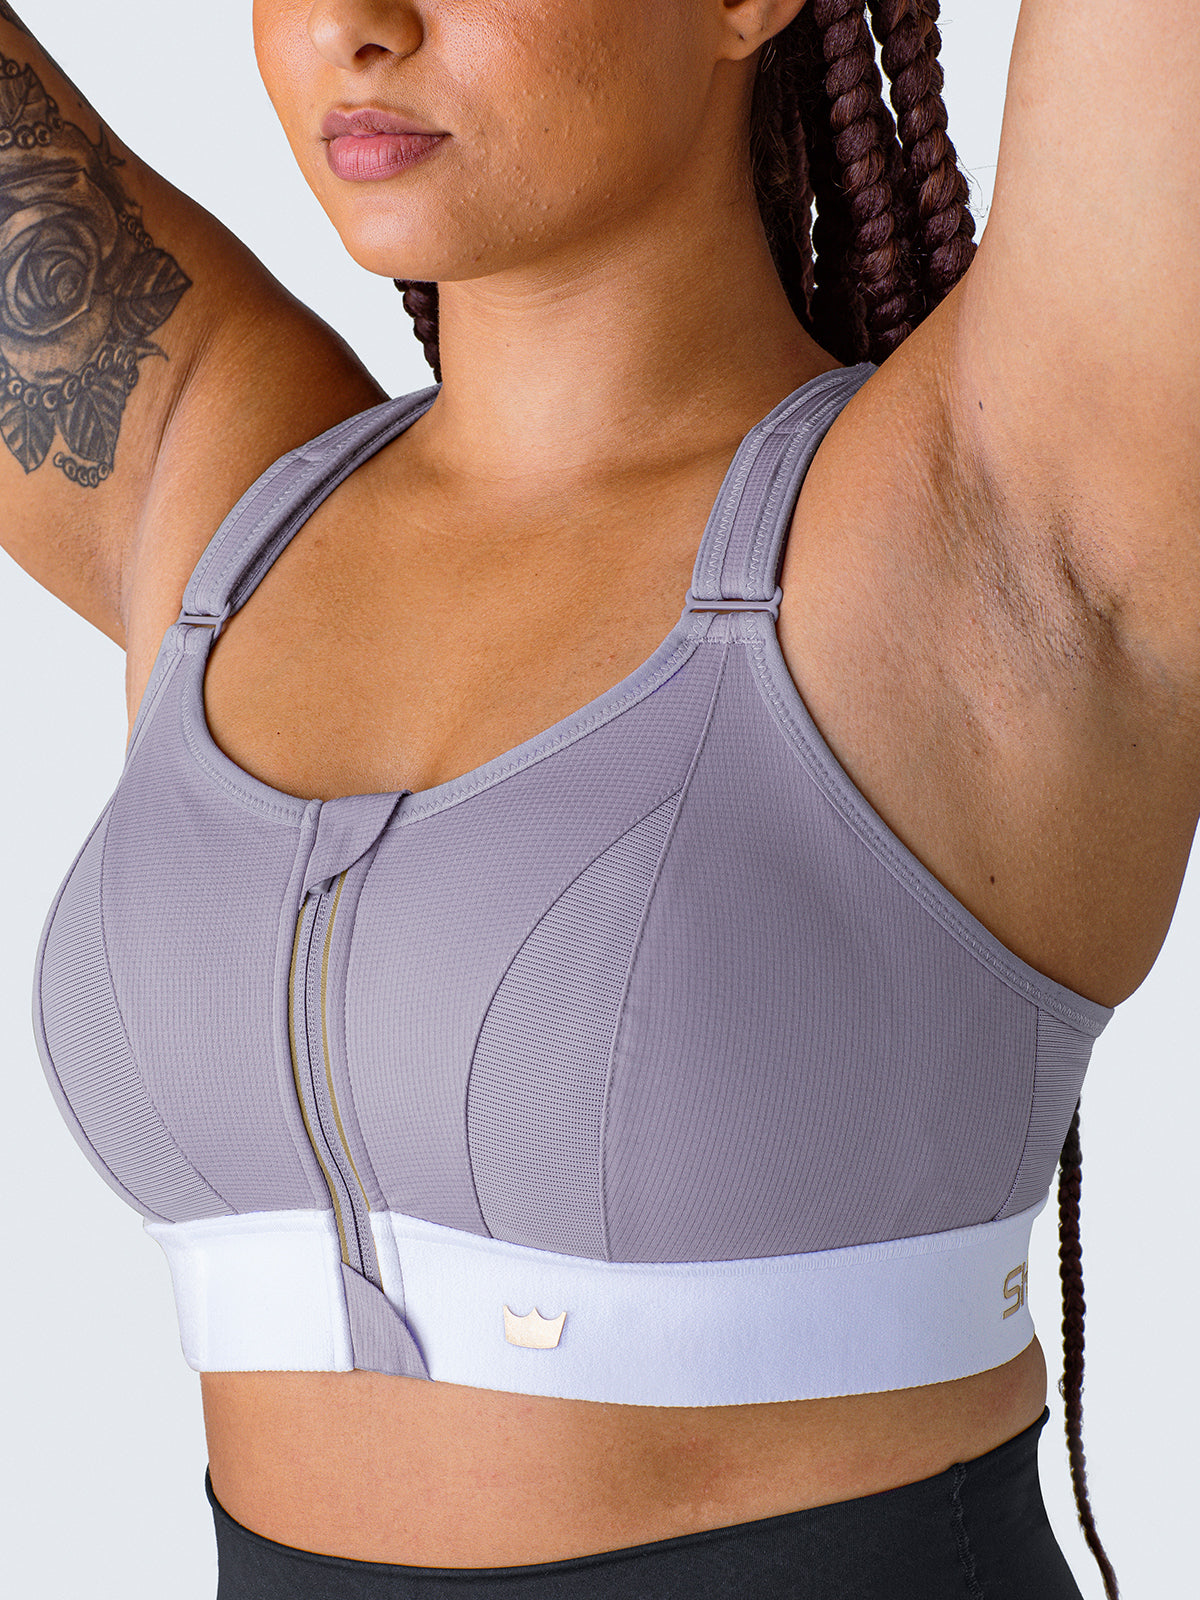 Pro-Fit Seamless Sport Bra Size Small Style Racer Back Wash Off Gray